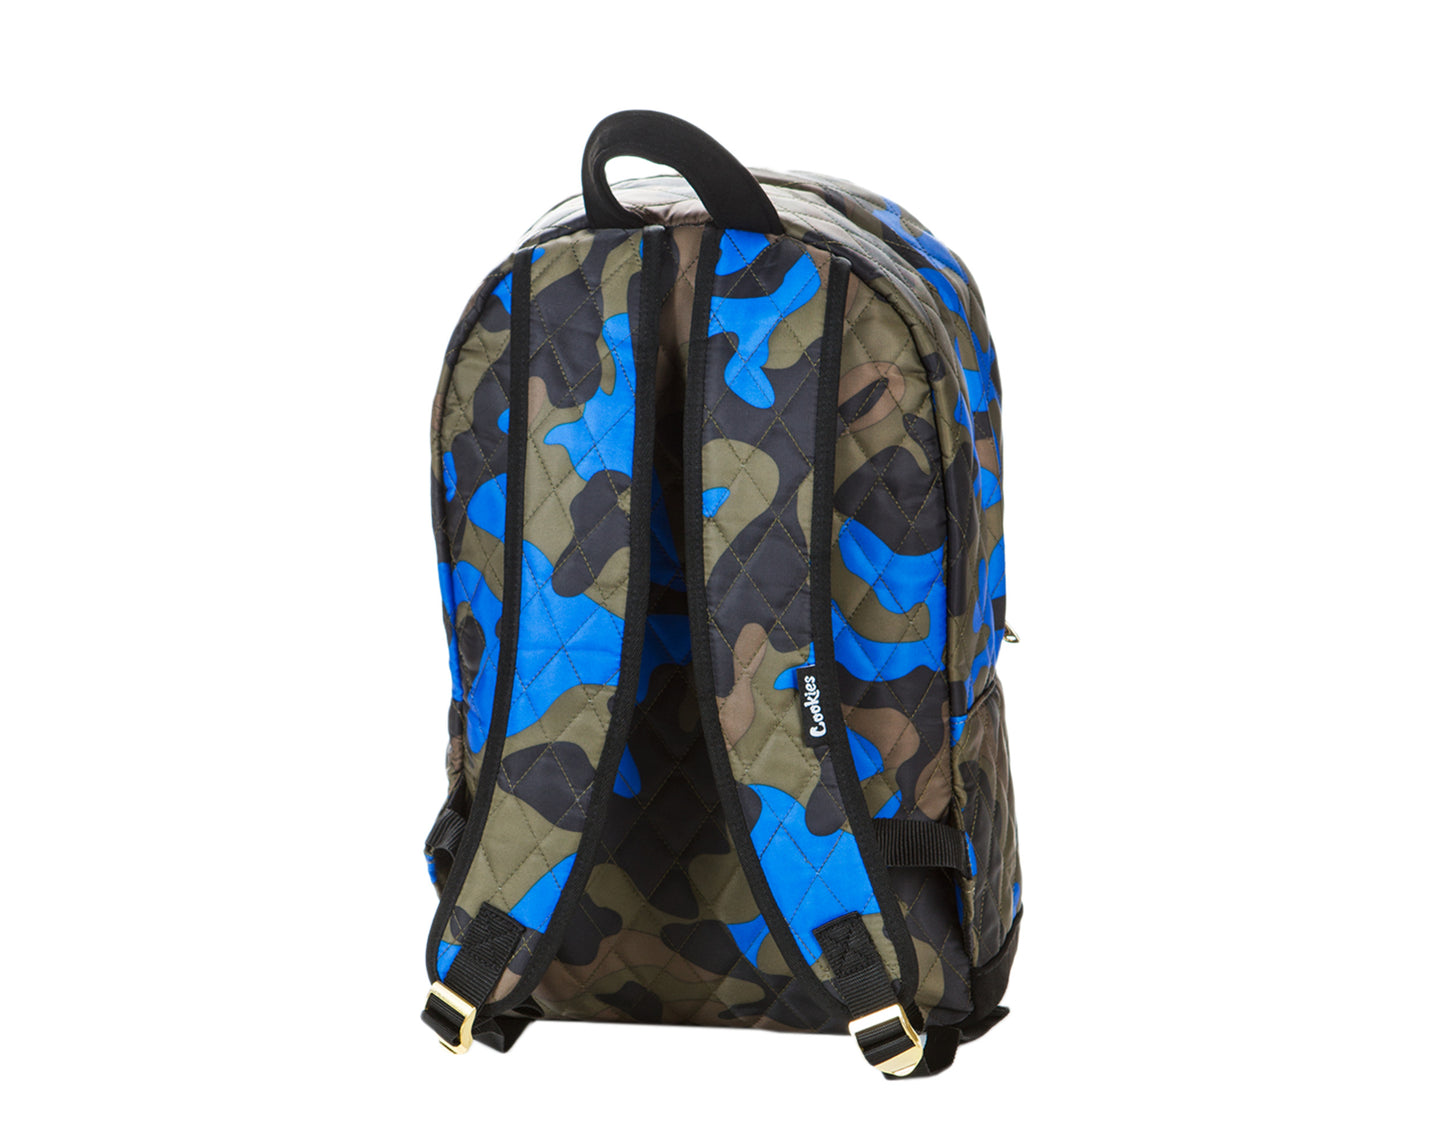 Cookies V3 Quilted Nylon Smell Proof Blue Camo Backpack 1546A4394-BLC